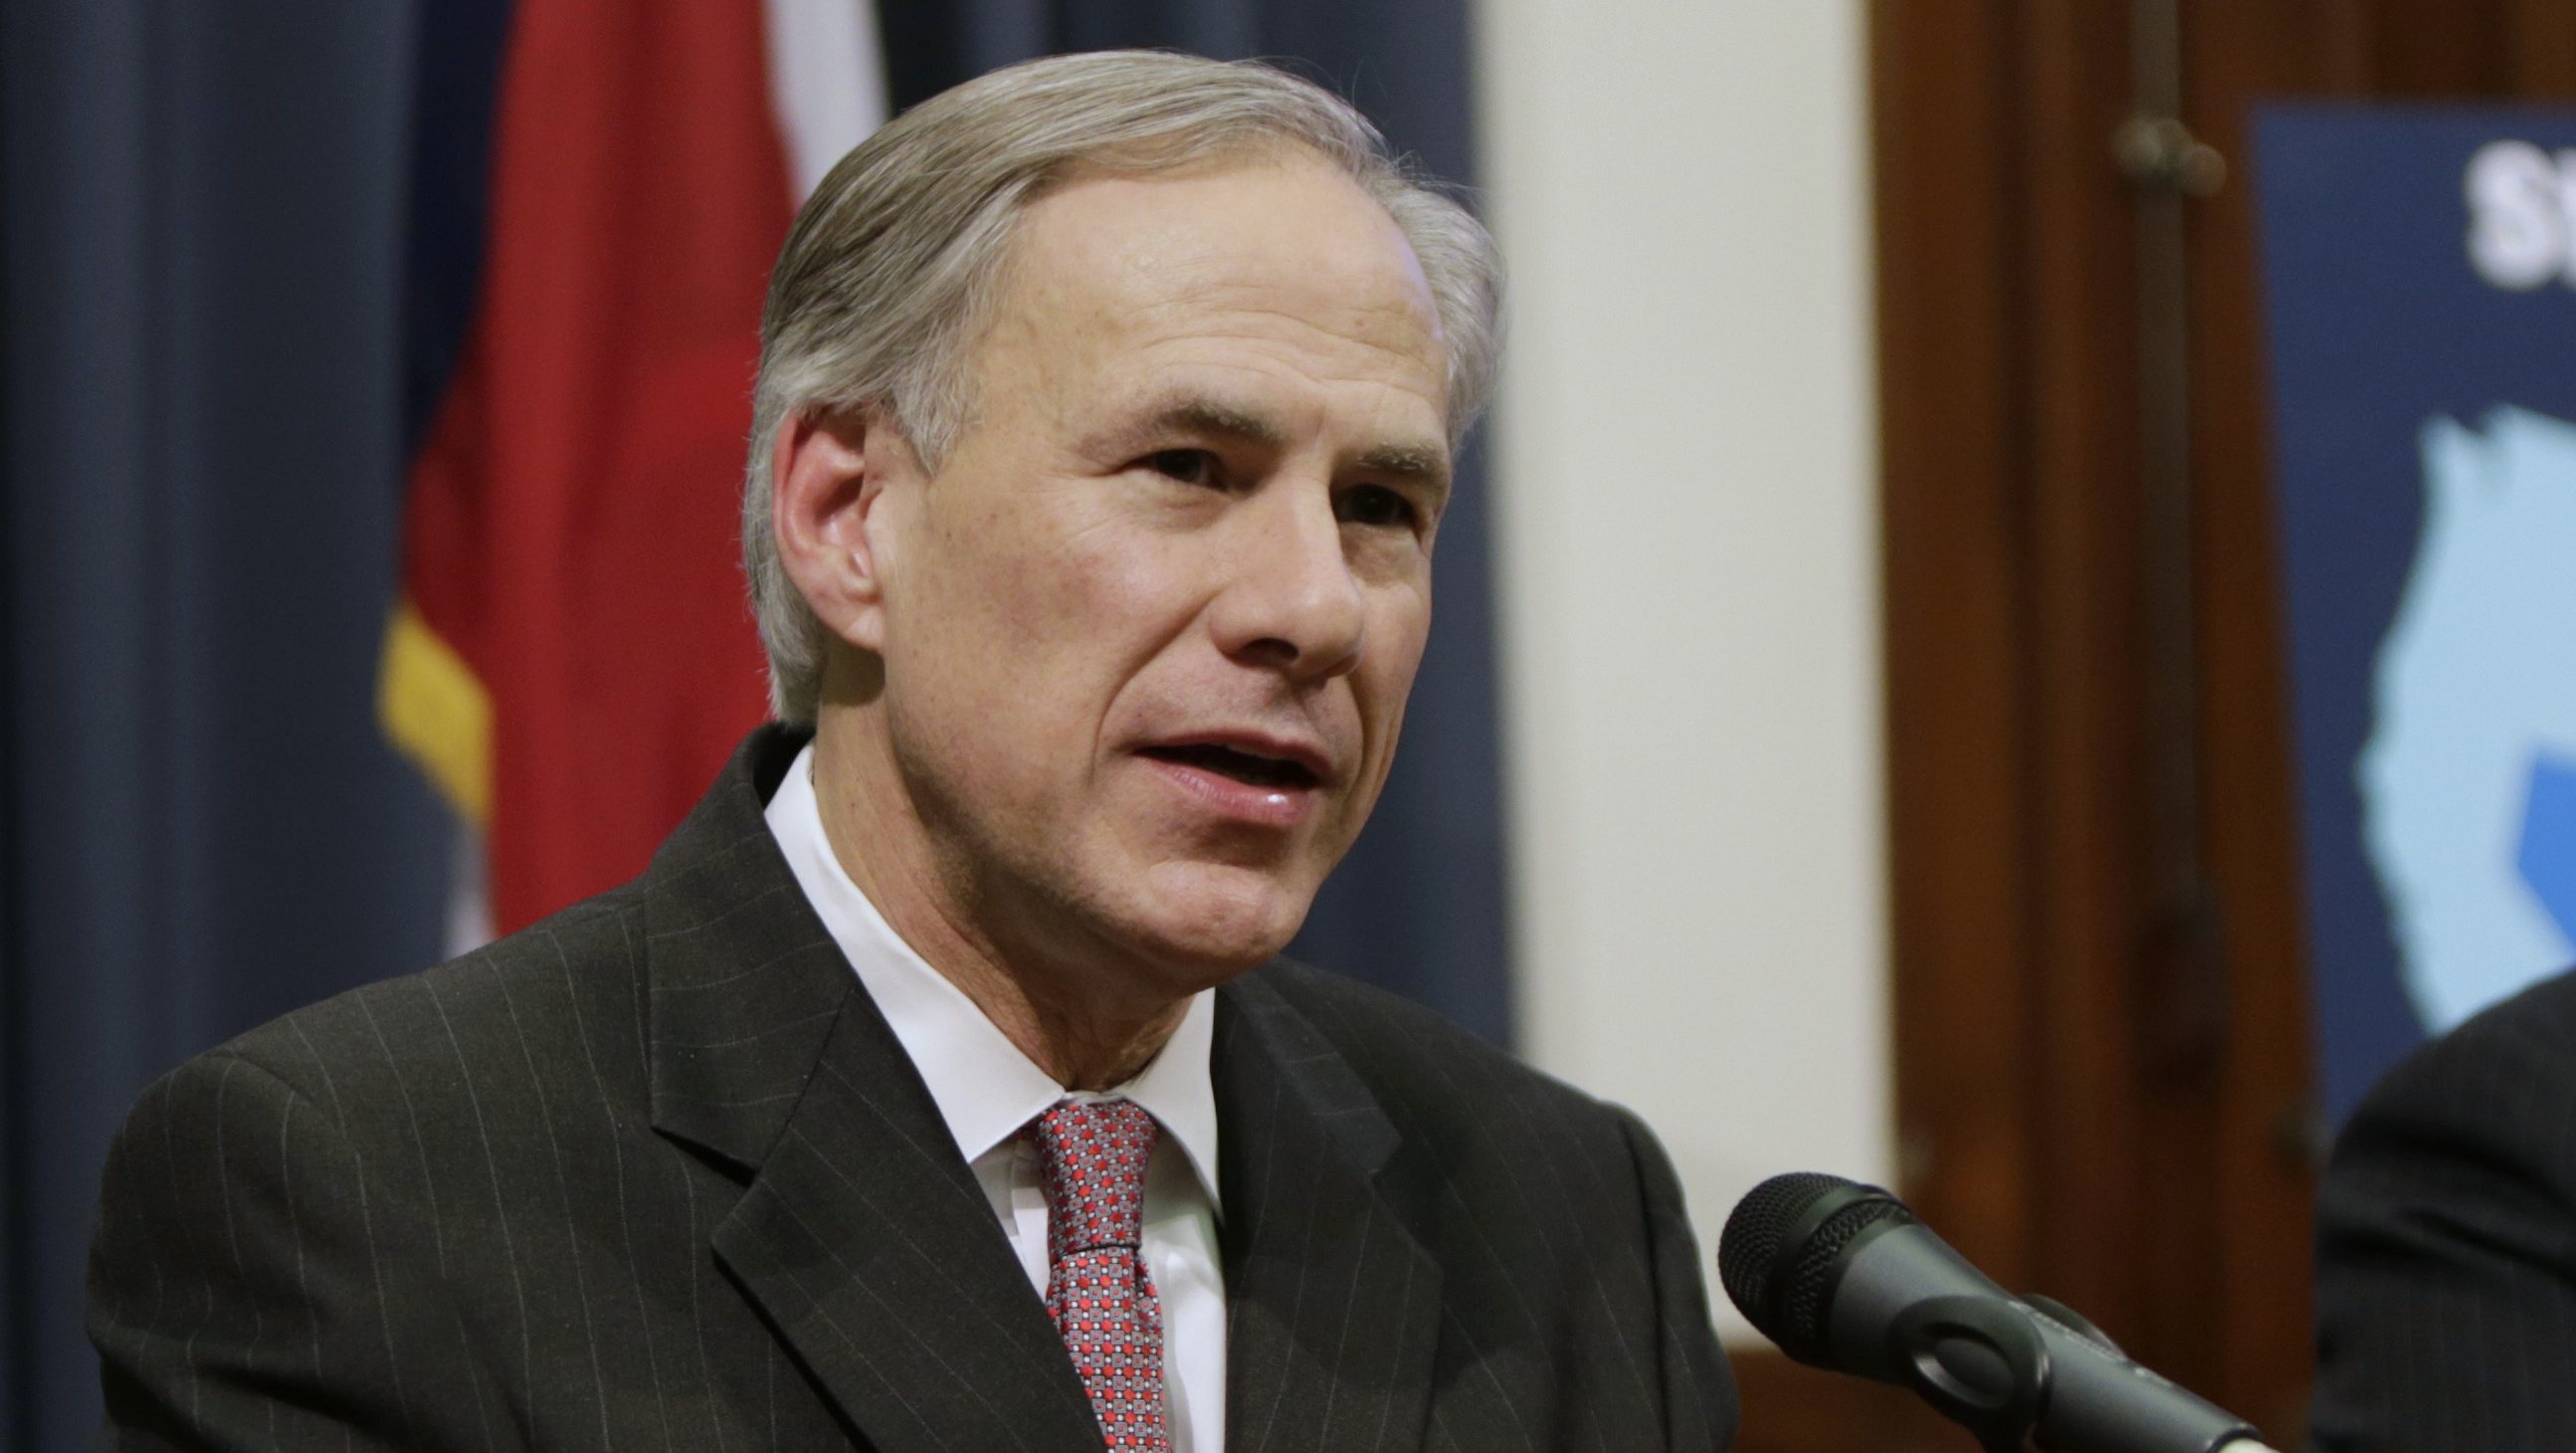 Texas Governor Greg Abbott, whose state is among 11 suing the Obama administration over its transgender bathroom directive to public schools. (Getty)